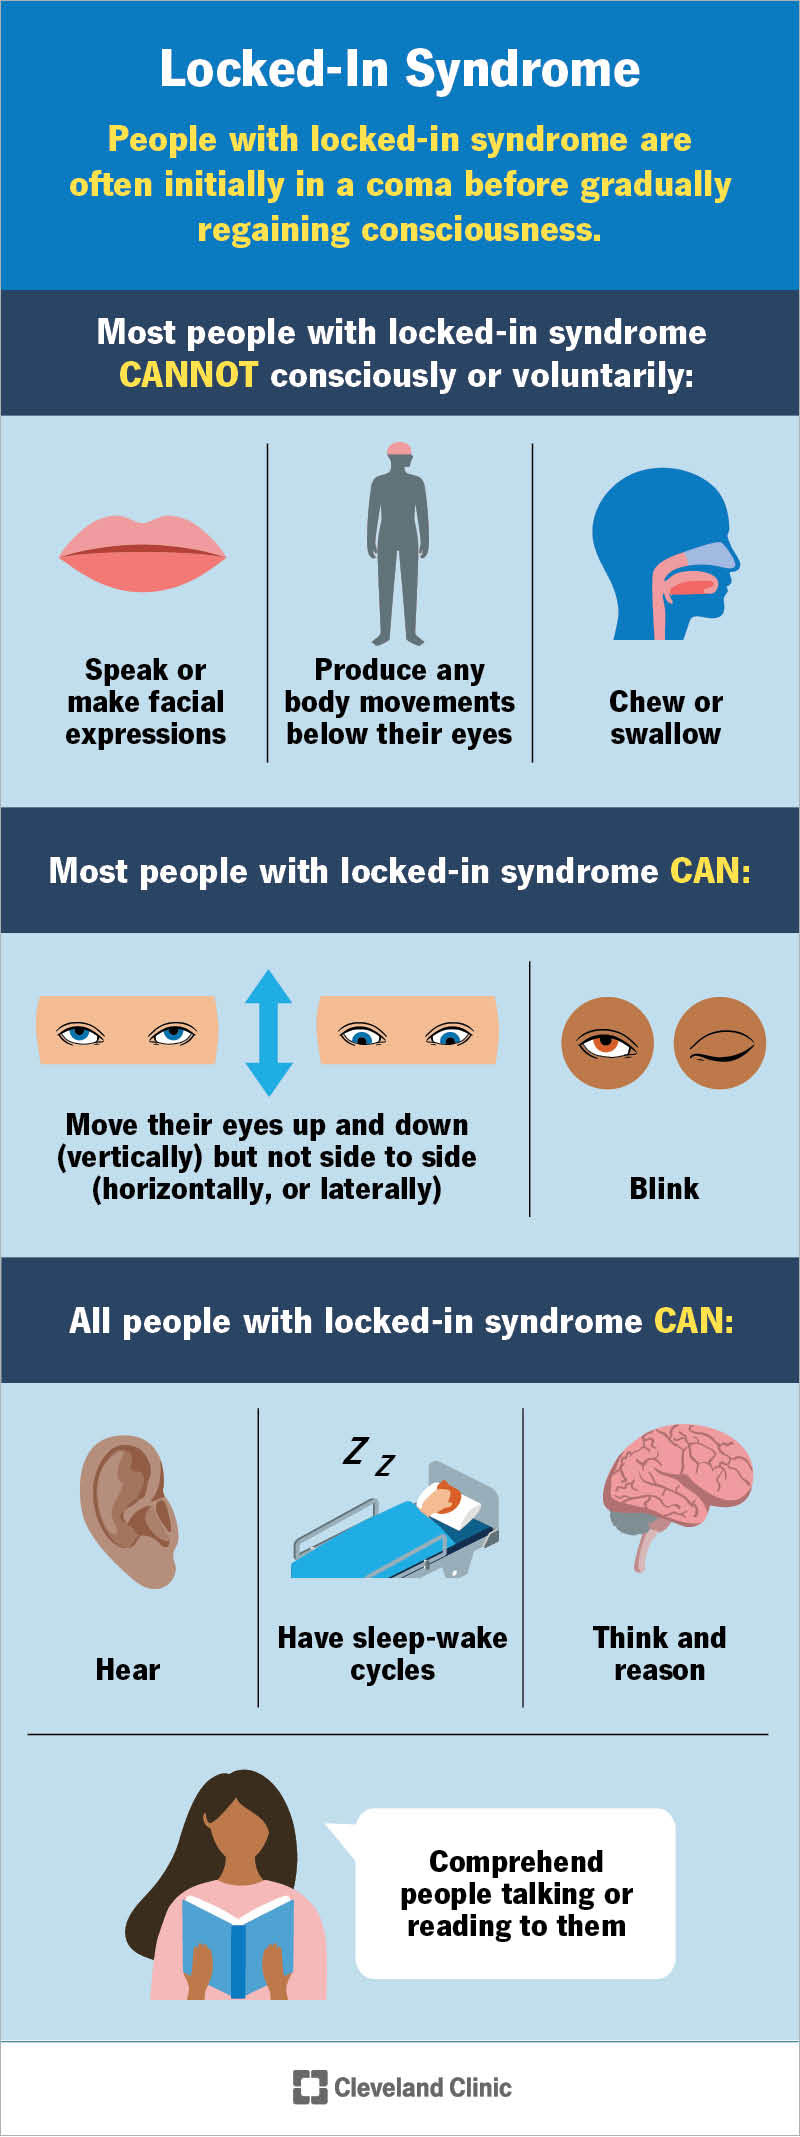 People with locked-in syndrome are conscious, alert and have their usual cognitive abilities, but they’re unable to show facial expressions, speak or move.